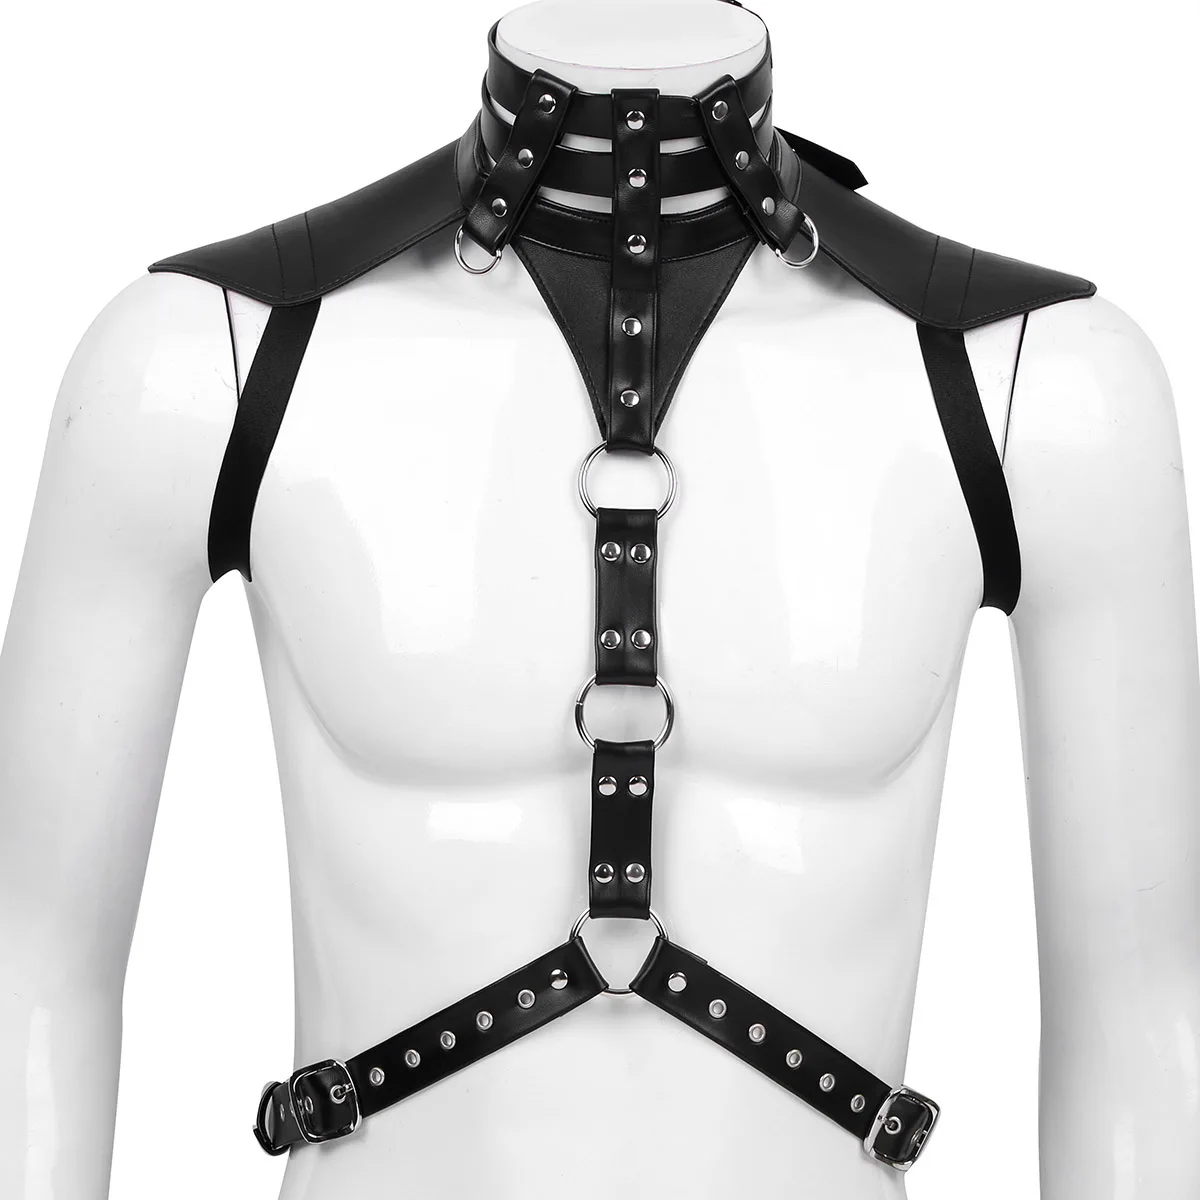 Sextoys for men Leather harness chain Body chain harness Gay leather harness Underwear gay harness Chest harness men Bdsm harness men